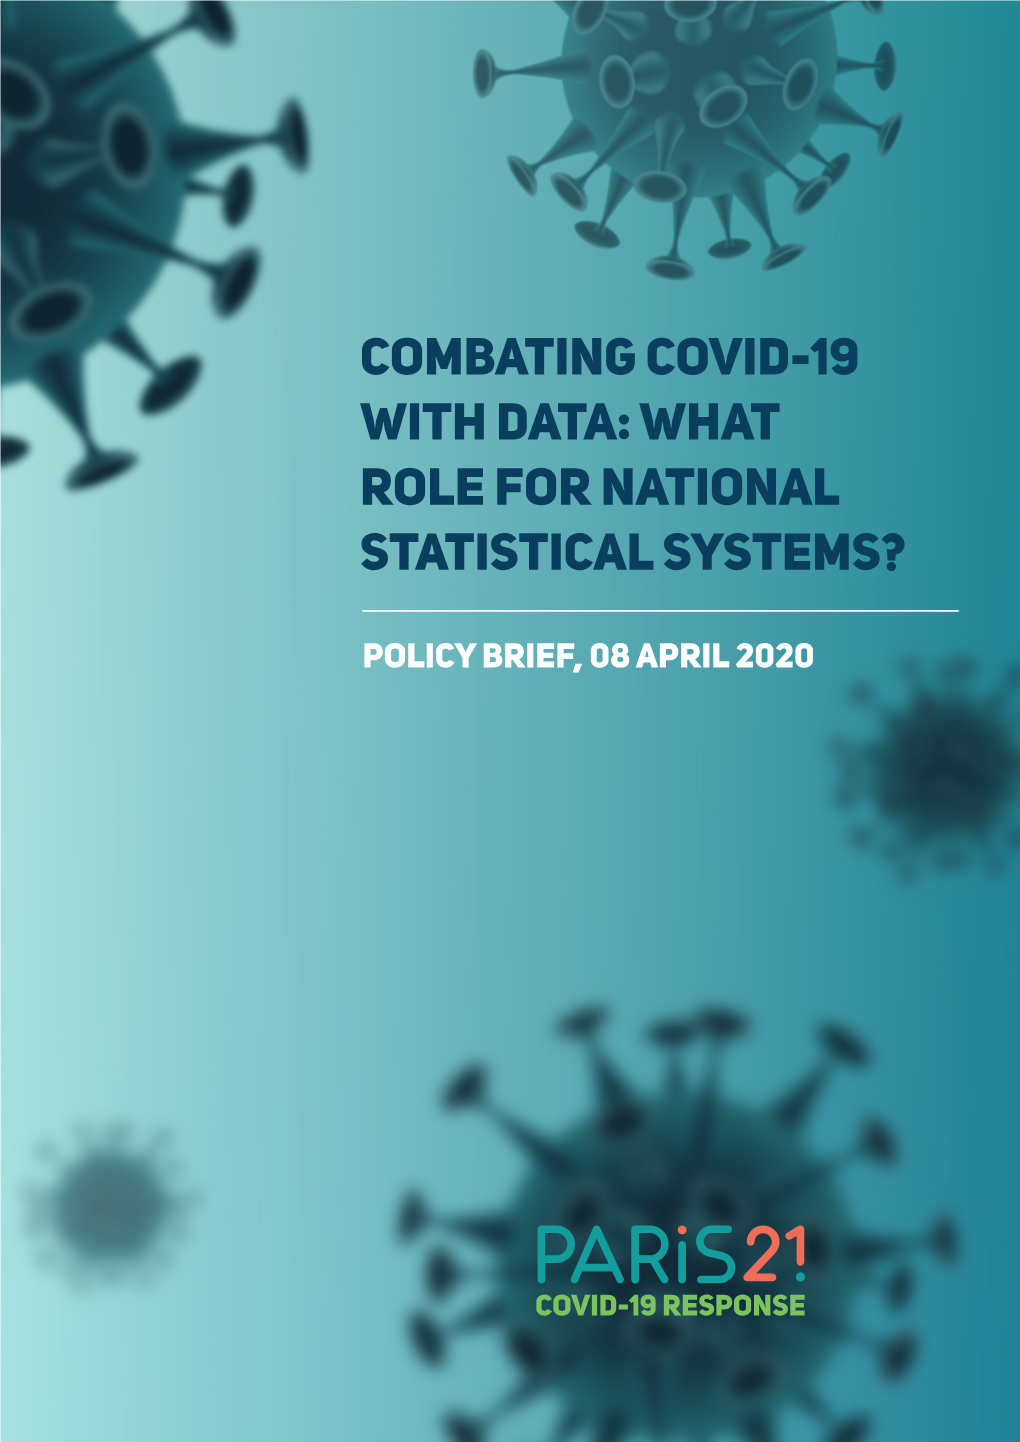 Combating Covid-19 with Data: What Role for National Statistical Systems? Policy Brief, 08 April 2020